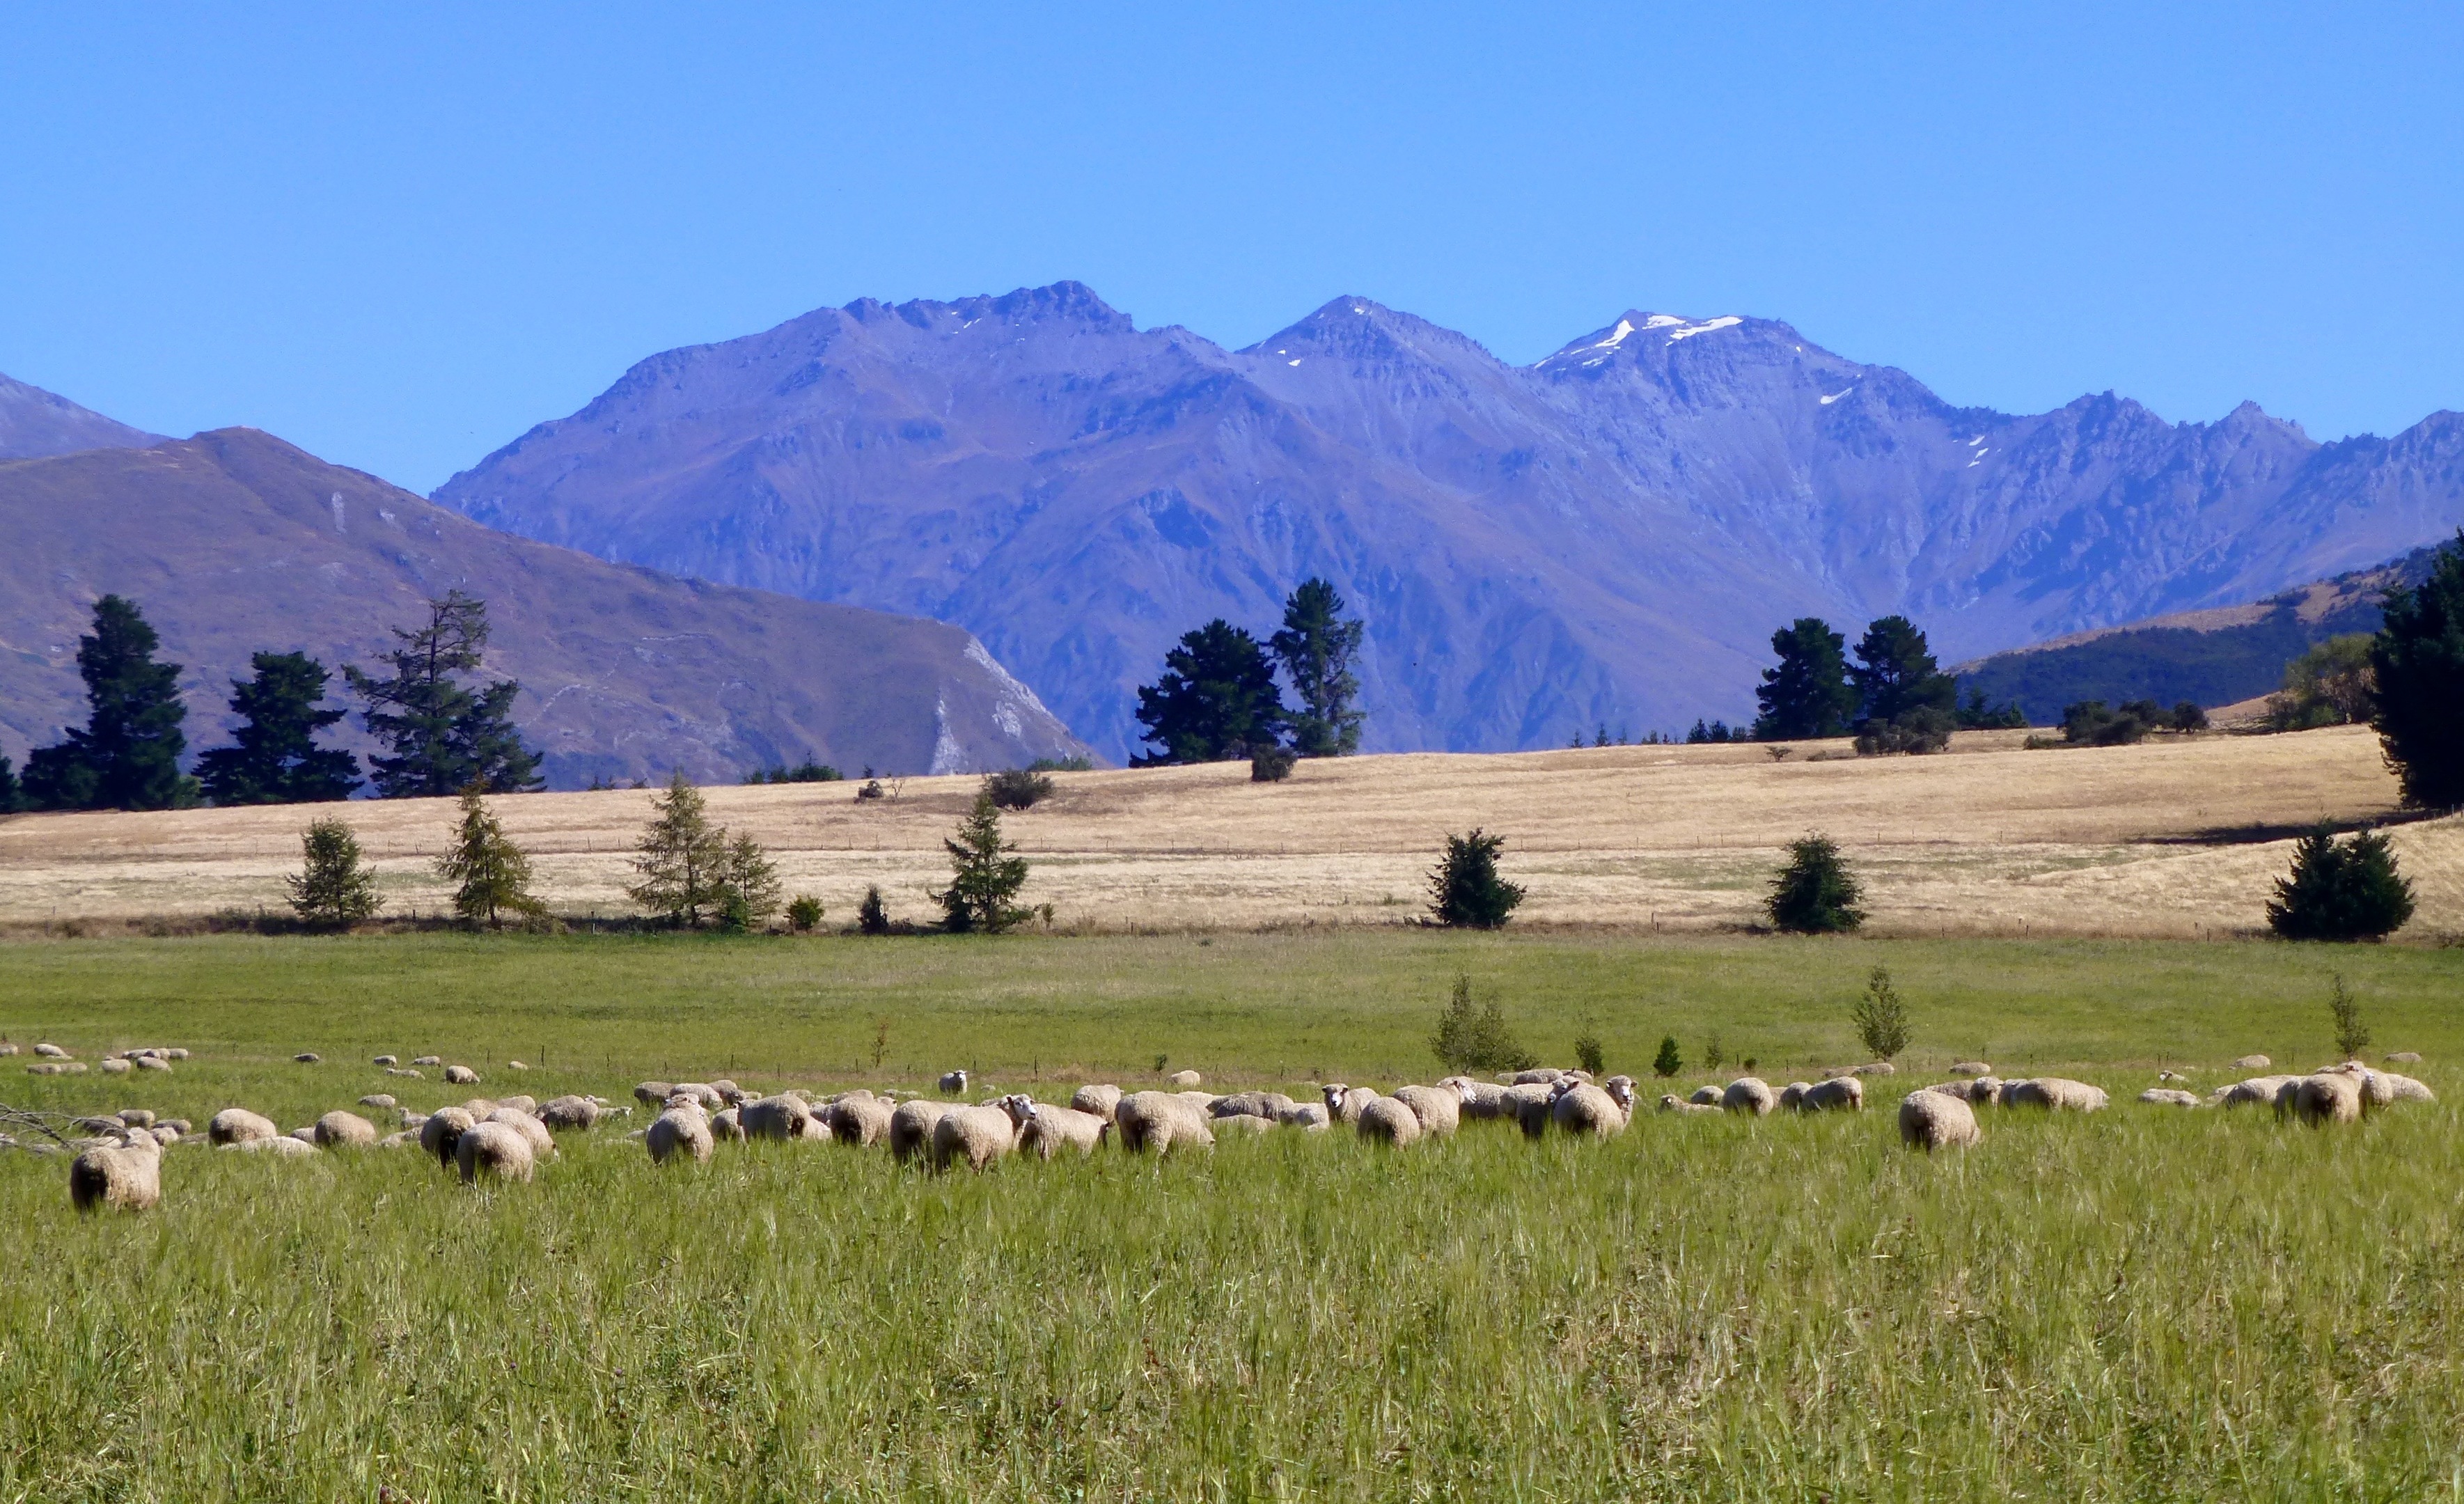 NZ sheep farmers have become more efficient wthout subsidies